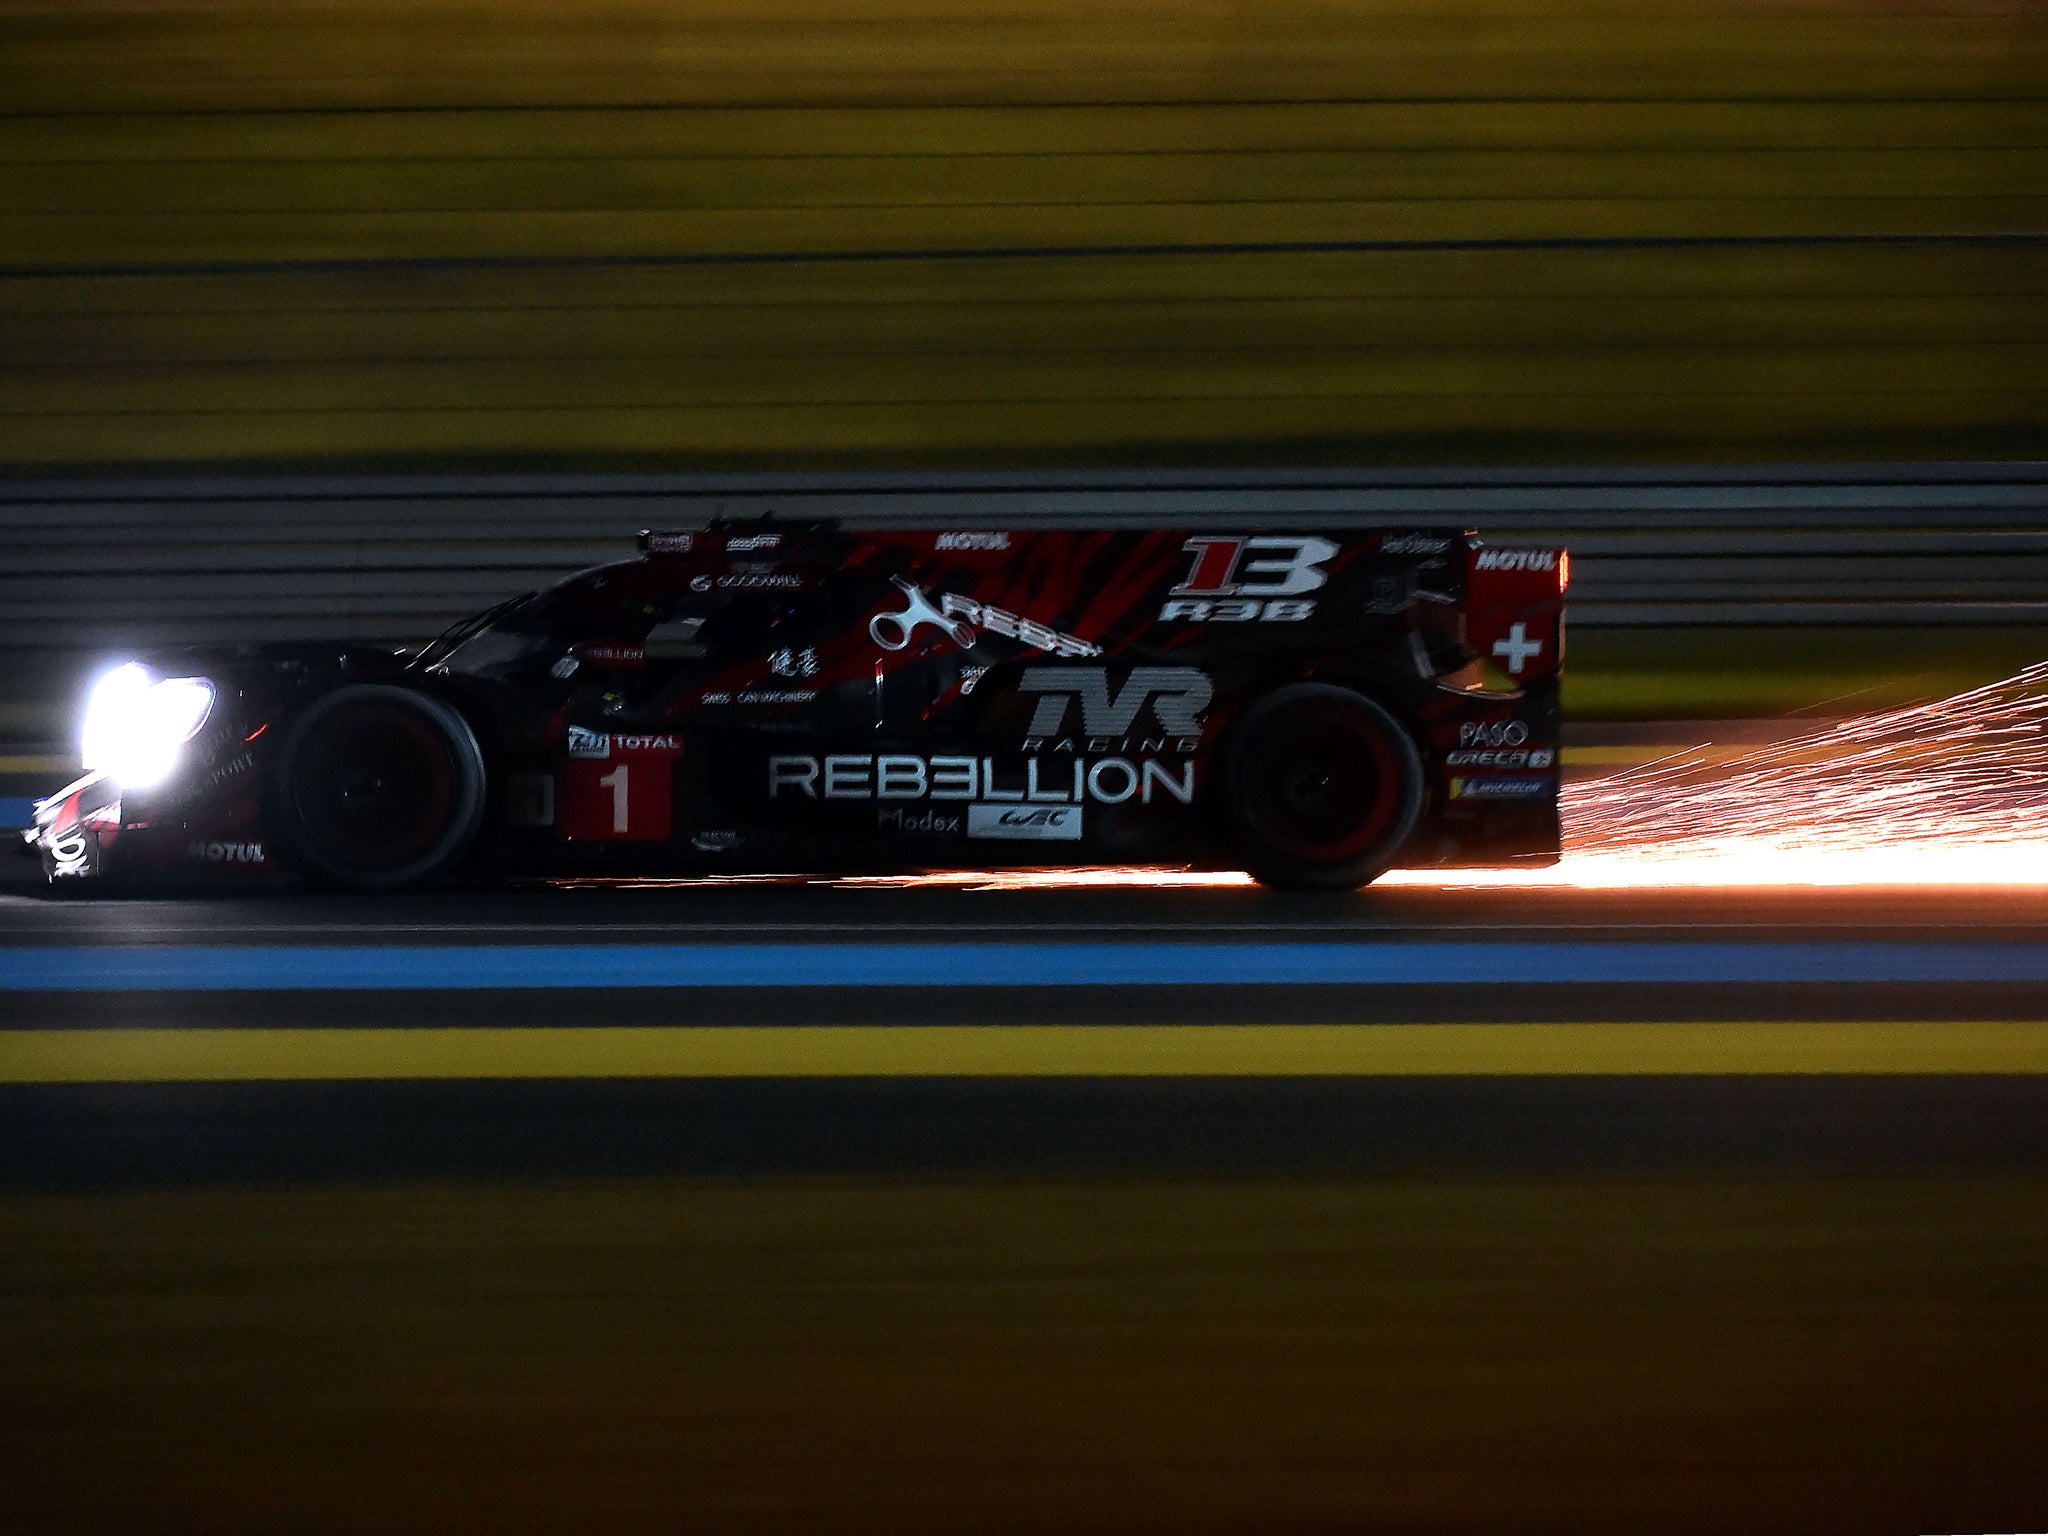 Neel Jani in the No 1 Rebellion during night practice